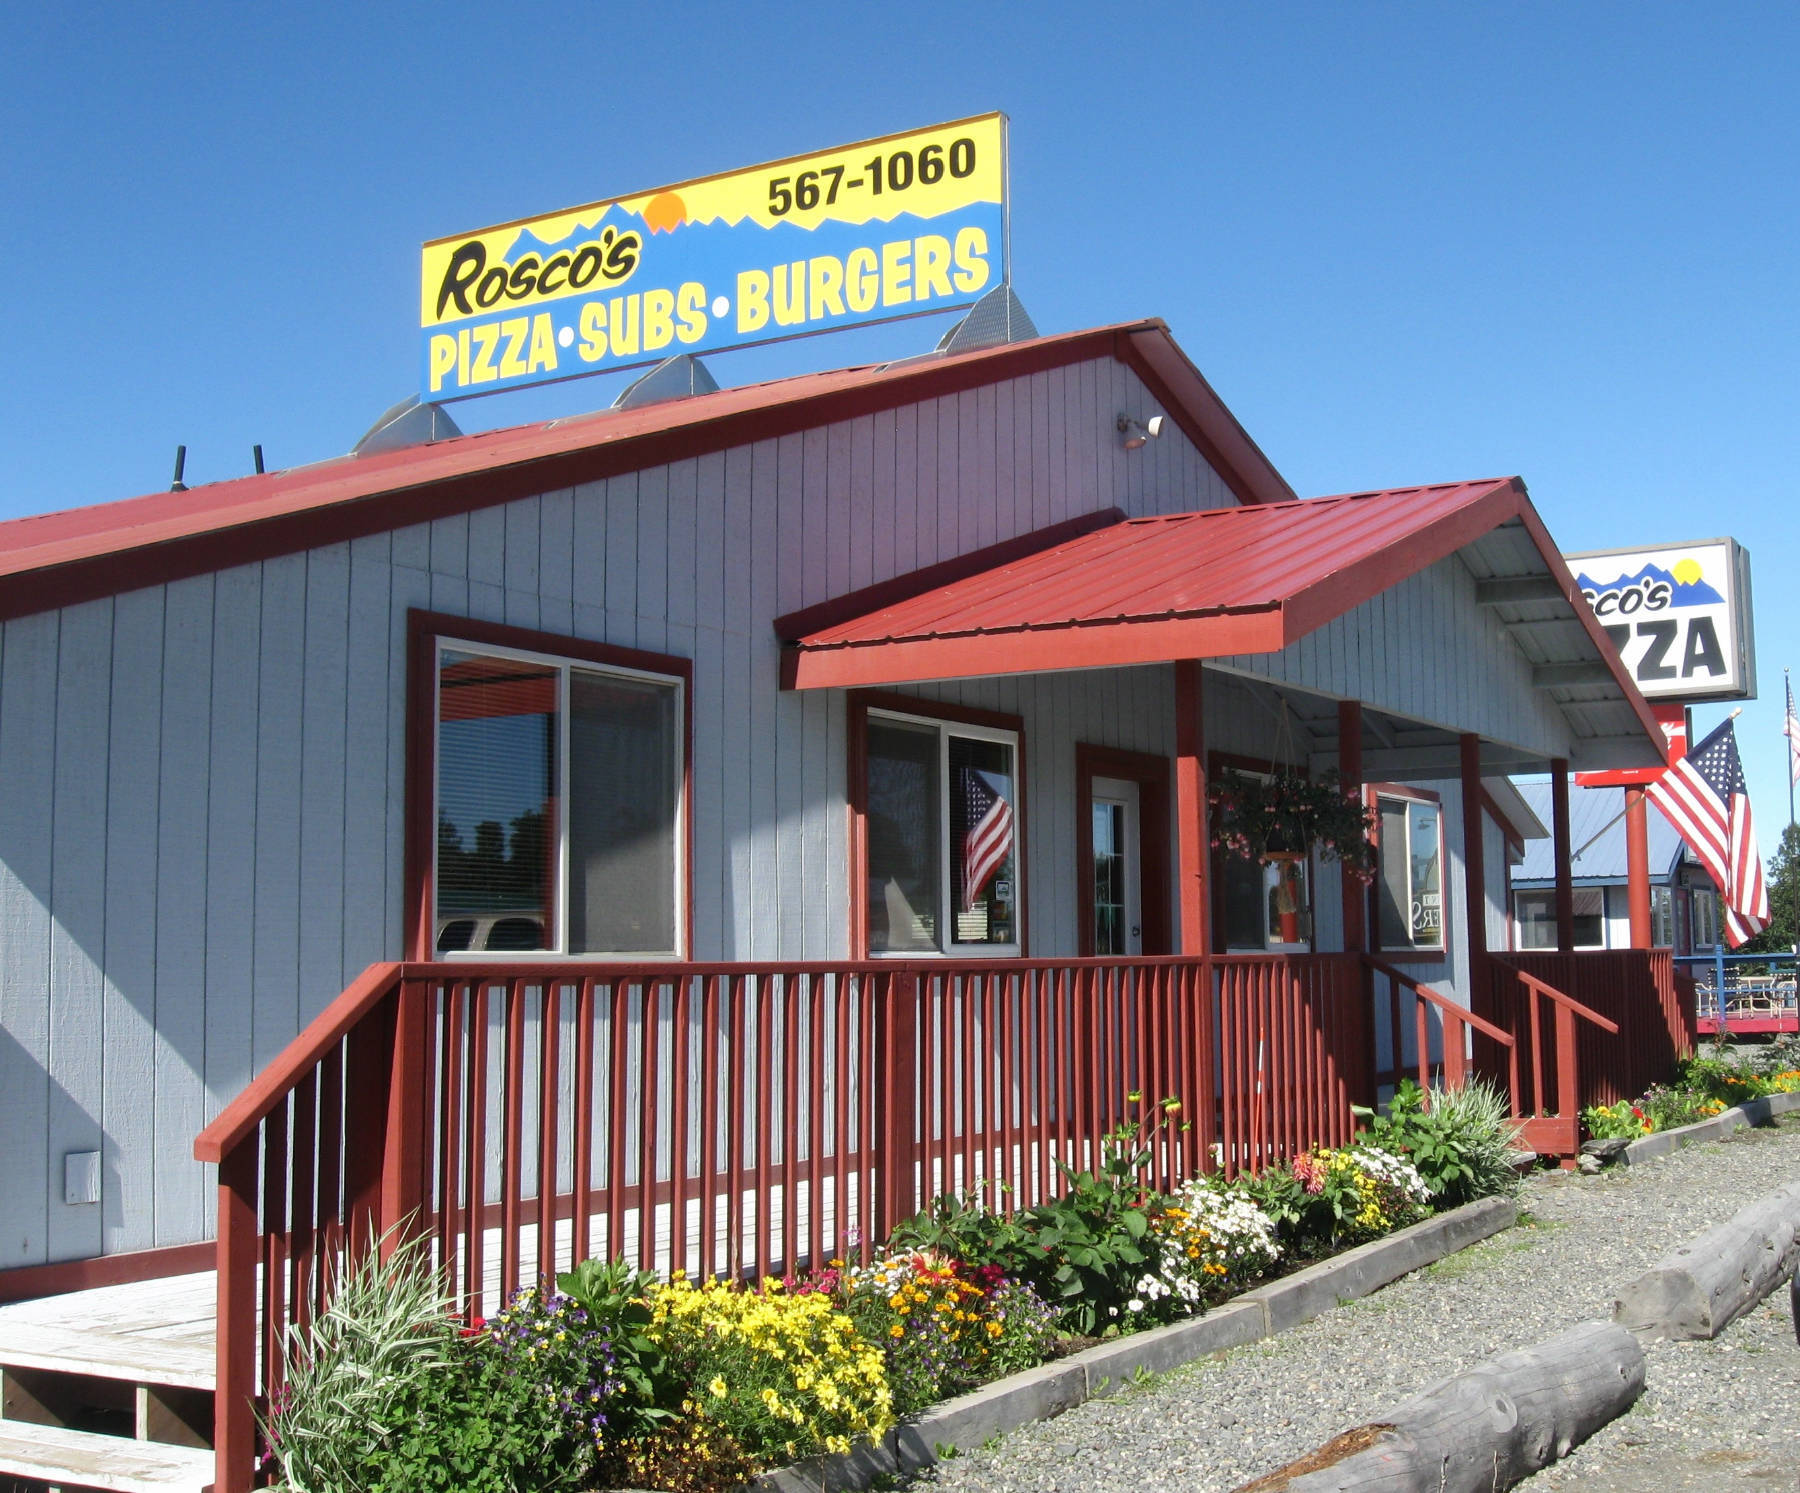 Rosco’s Pizza is photographed in Ninilchik, Alaska. Photo provided by Ross Cameron